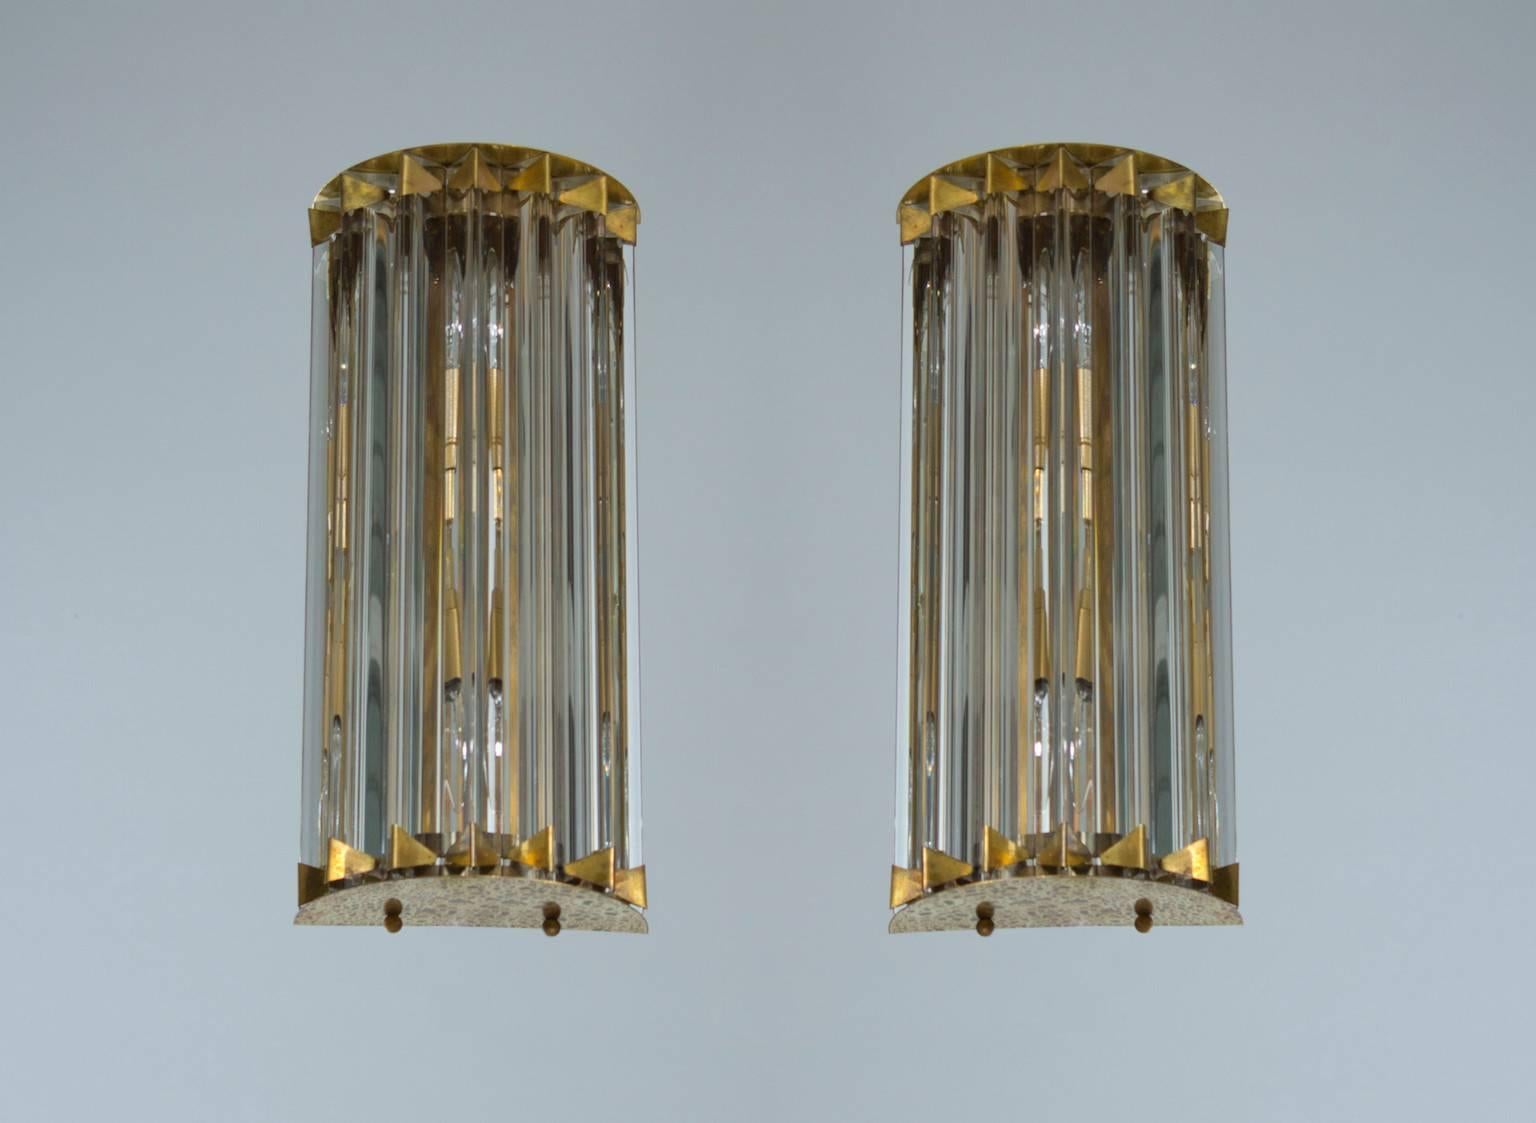 Pair of Italian sconces in Murano glass attributed to Camer Glass 1960s, Italy.
This gorgeous pair of Italian Murano sconces is attributed to Camer Glass. The sconces are composed of clear glass Triedro elements, forming two semicylinders, and